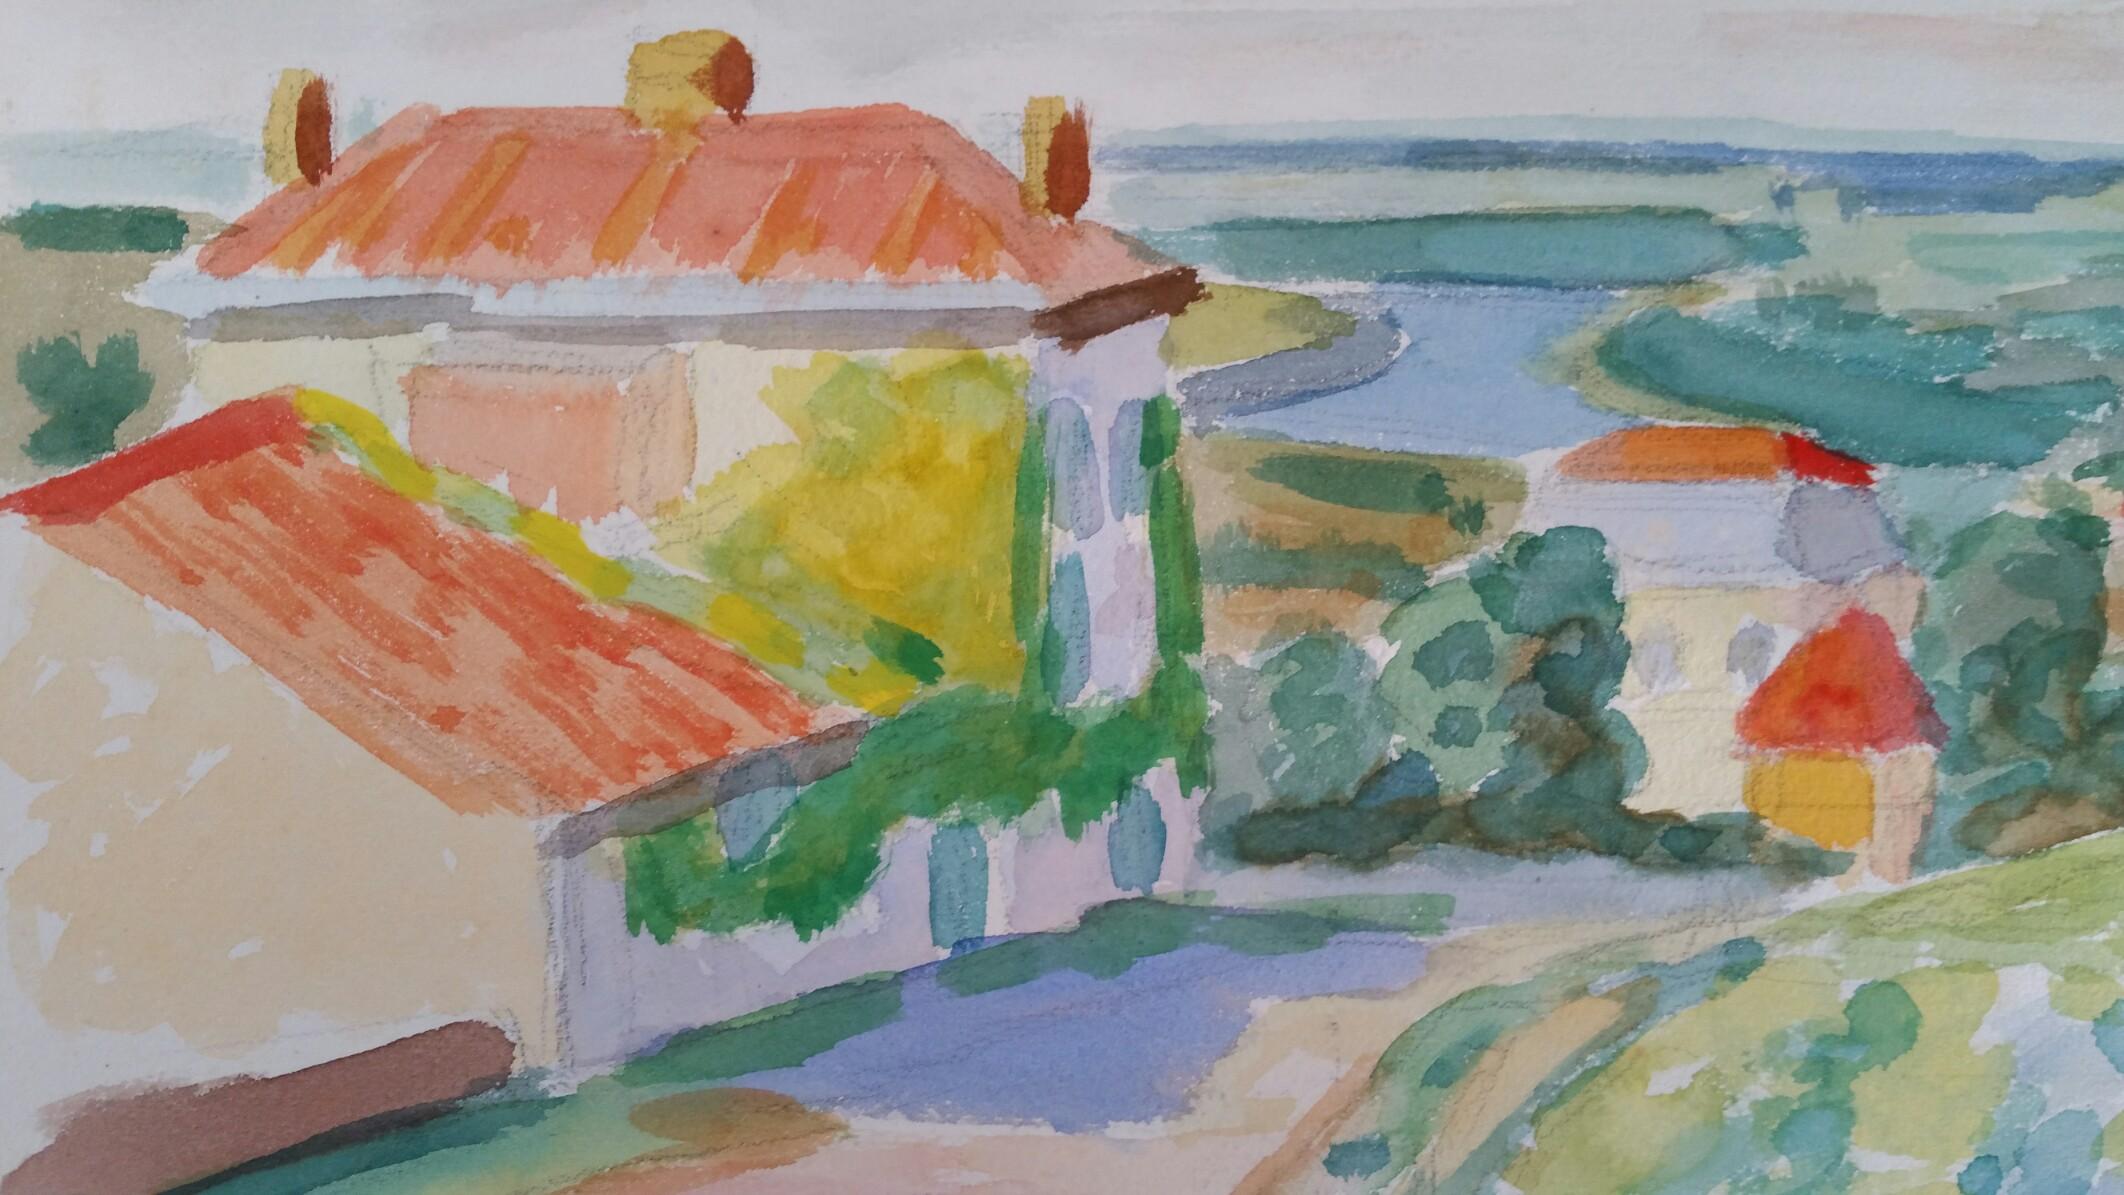 Provence Landscape, Panoramic View of a Riverside Vineyard Village
by Louis Bellon (French 1908-1998)
Signed lower right, dated 62 (1962)
watercolour painting on paper, unframed
measurements: 9.5 x 13 inches

provenance: private collection of the